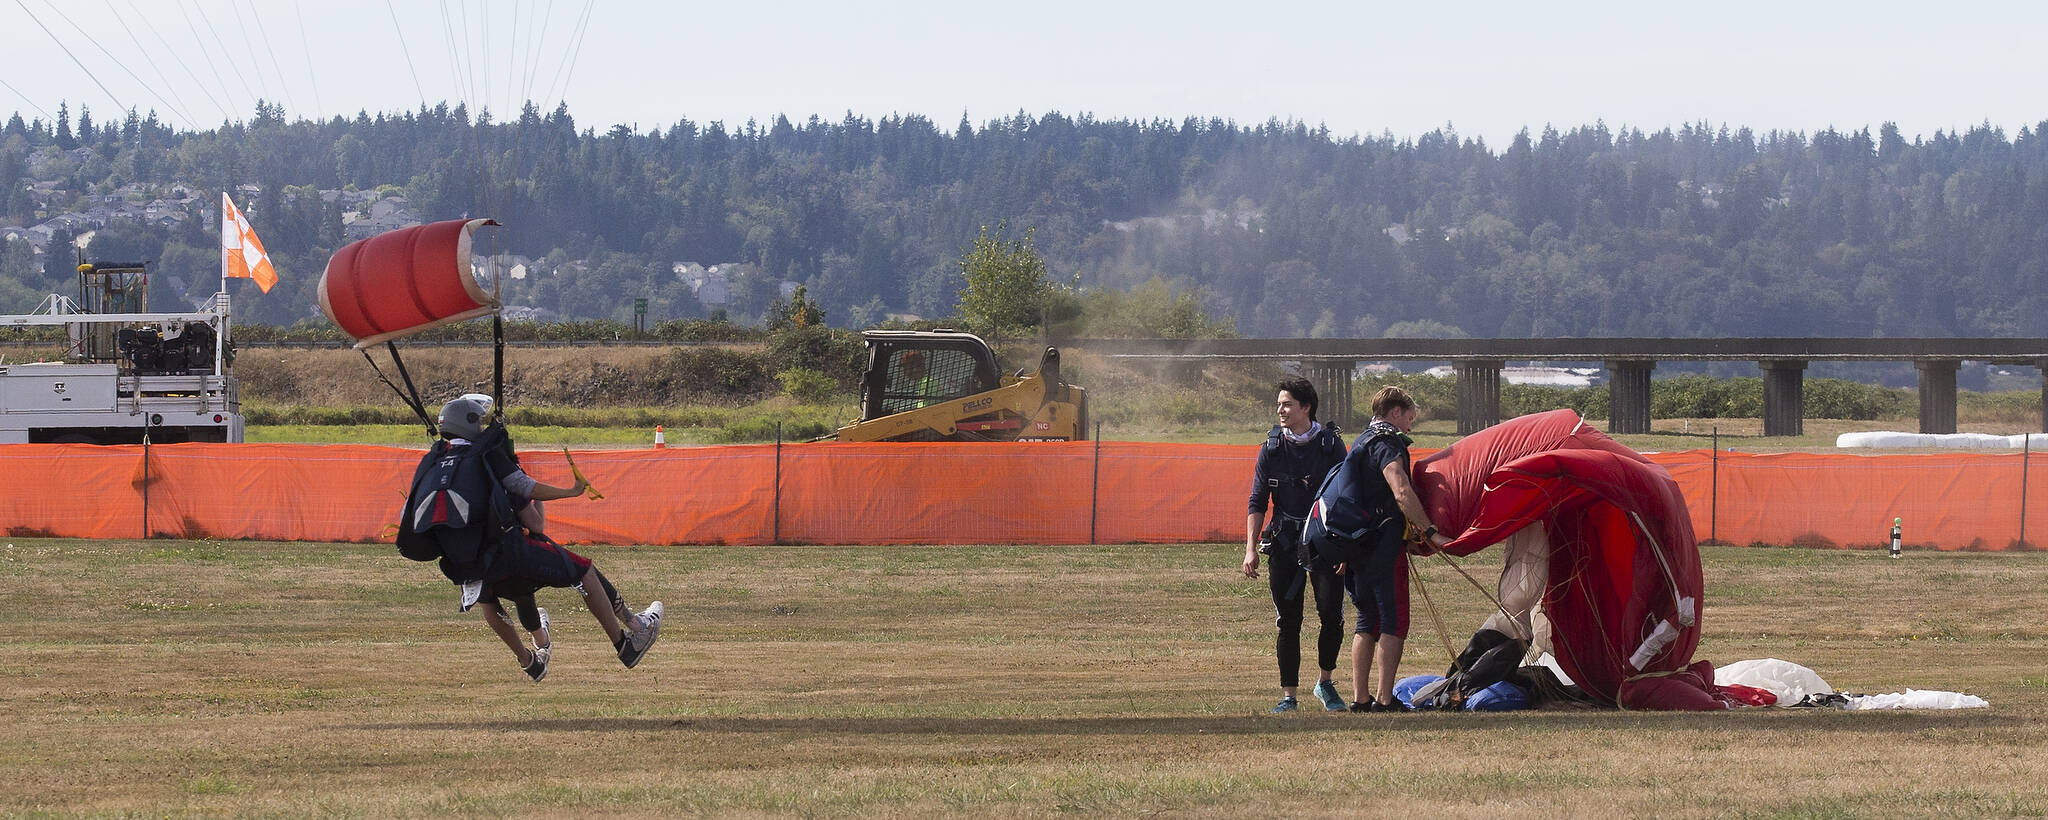 Tandem parachutists with Skydive Snohomish land and gather their canopies at Harvey Field in Snohomish on Thursday while repaving is underway at the nearby asphalt runway. (Andy Bronson / The Herald)